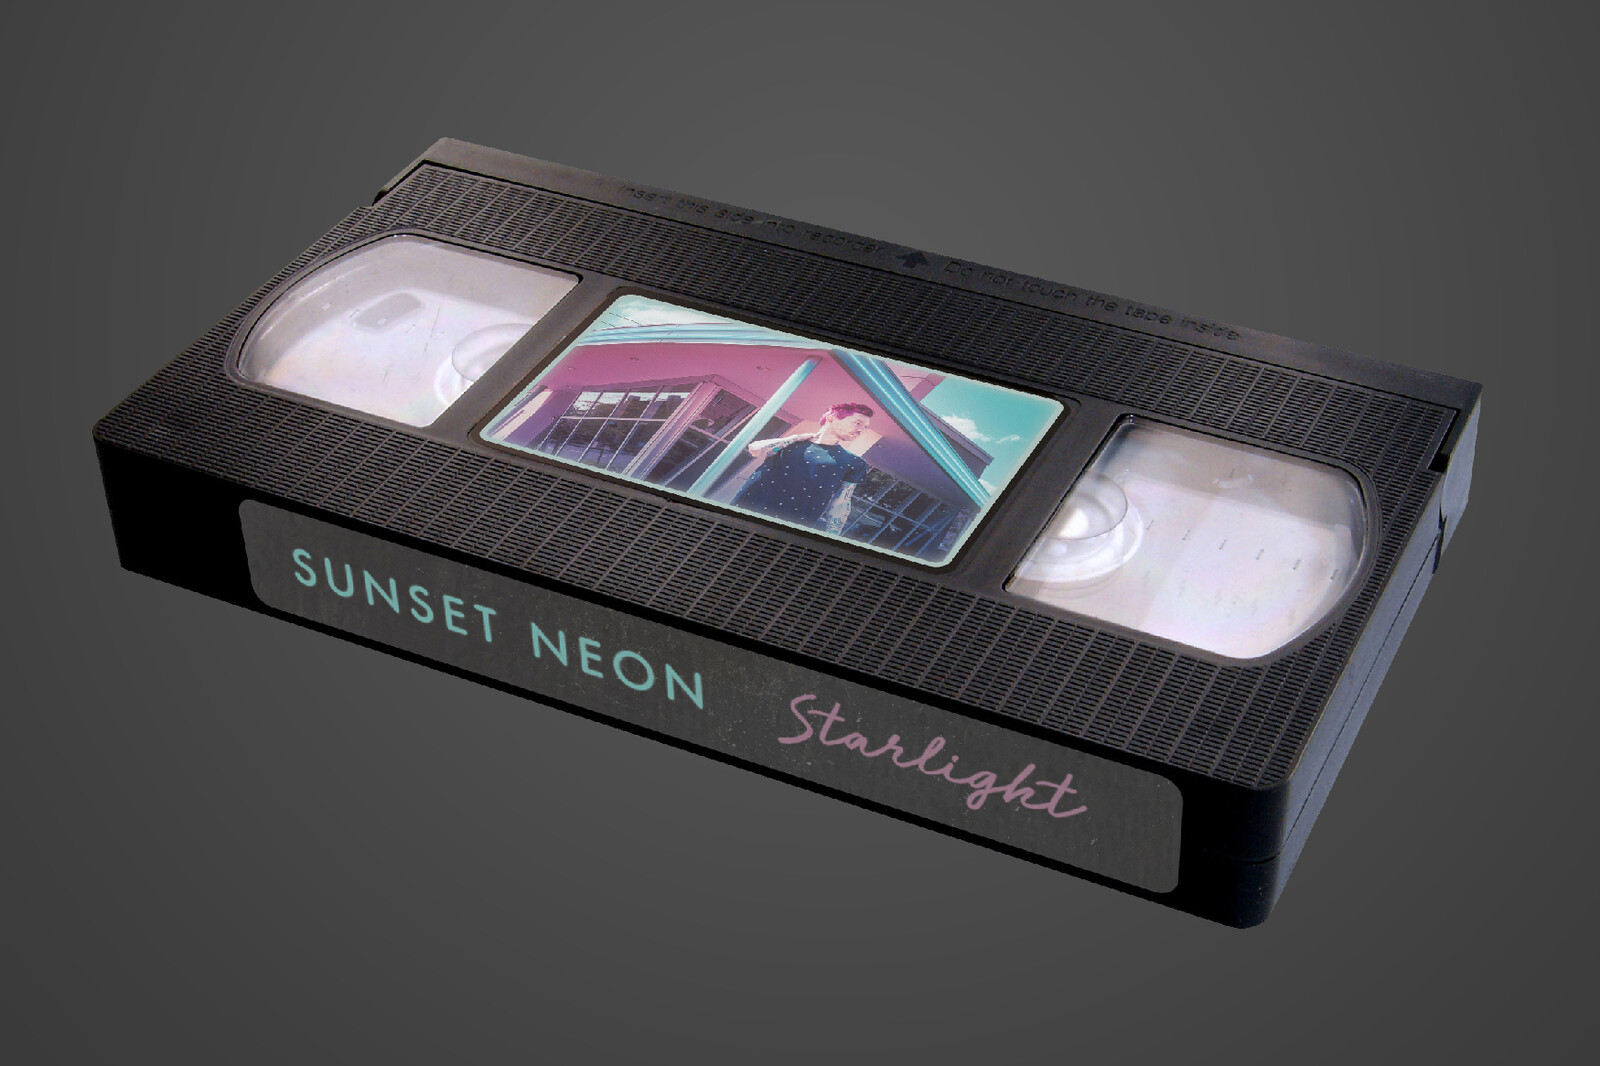 Limited Ed. VHS containing full album with visualizers